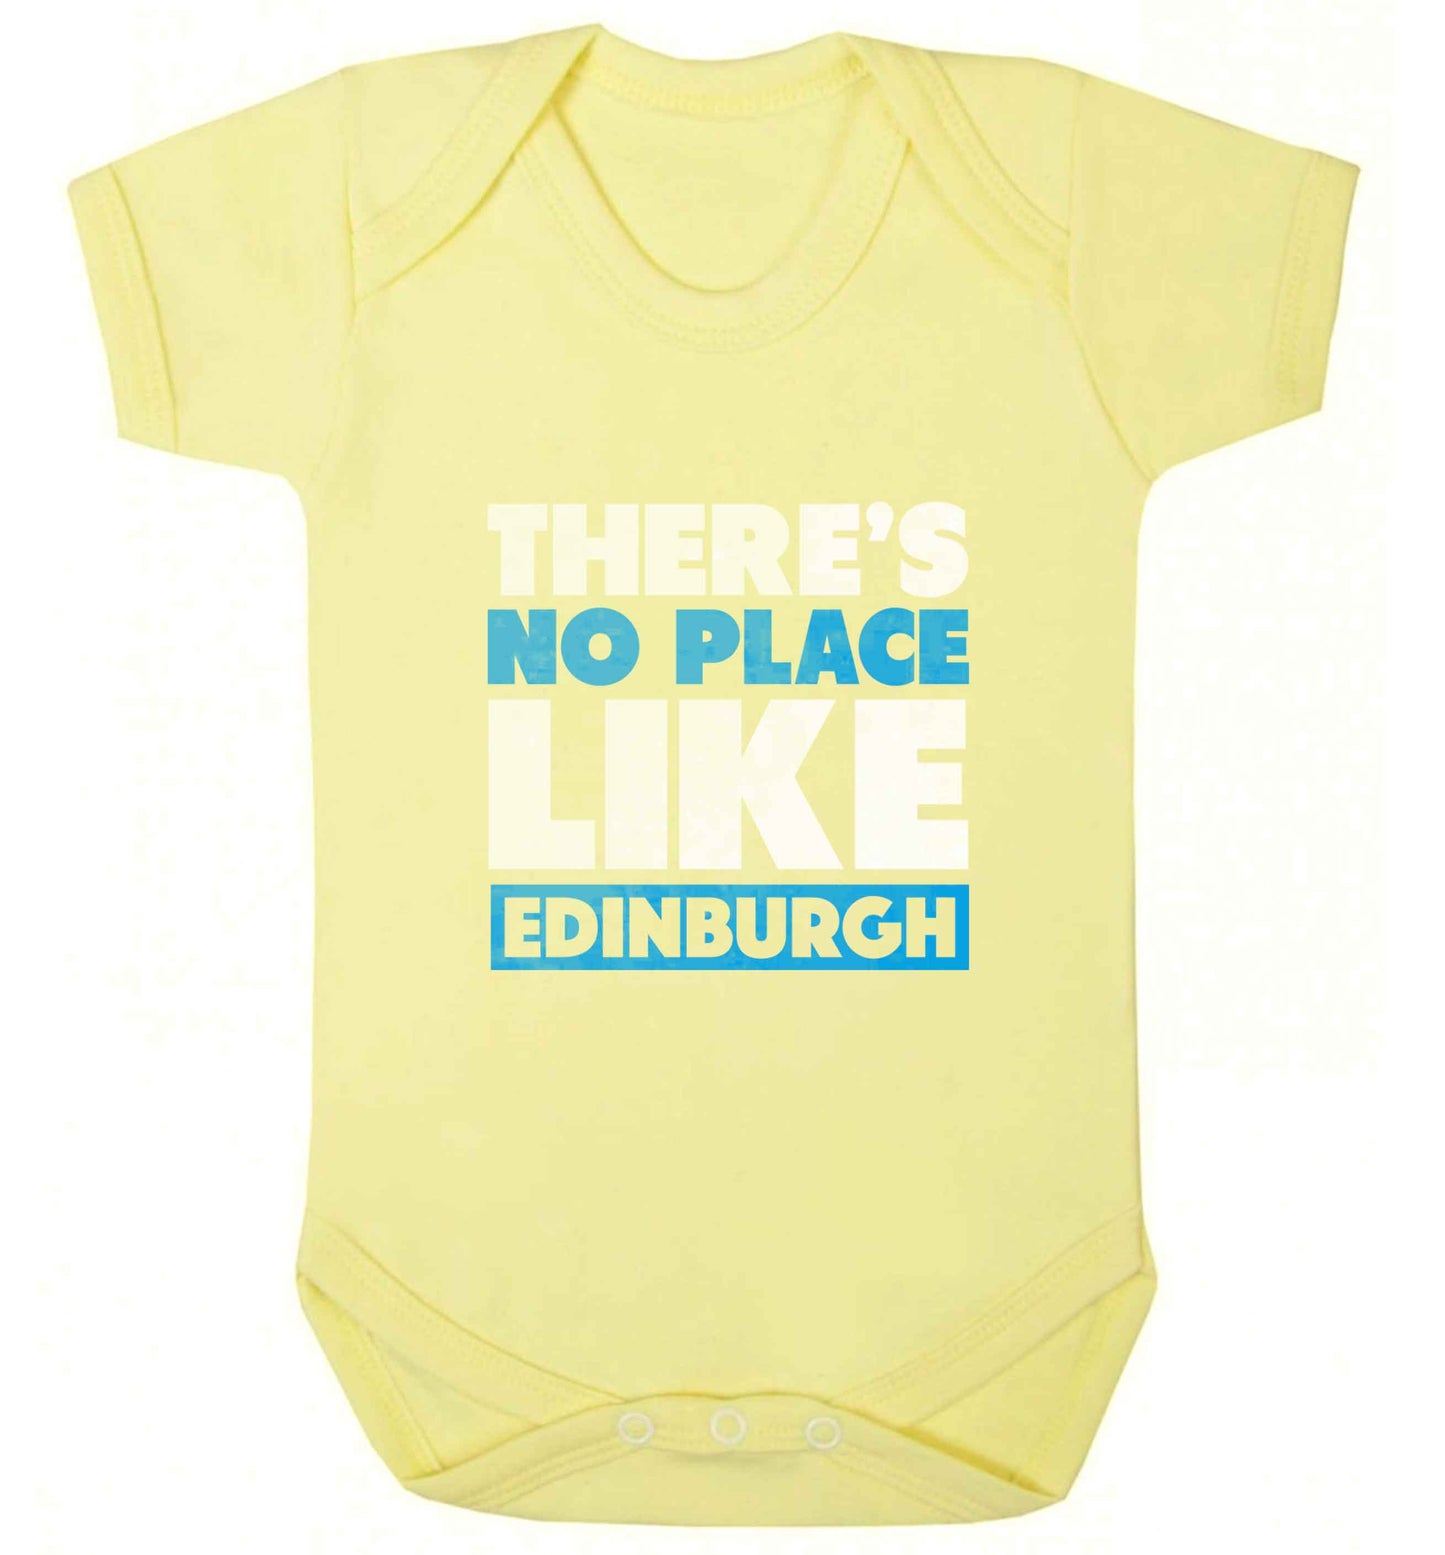 There's no place like Edinburgh baby vest pale yellow 18-24 months